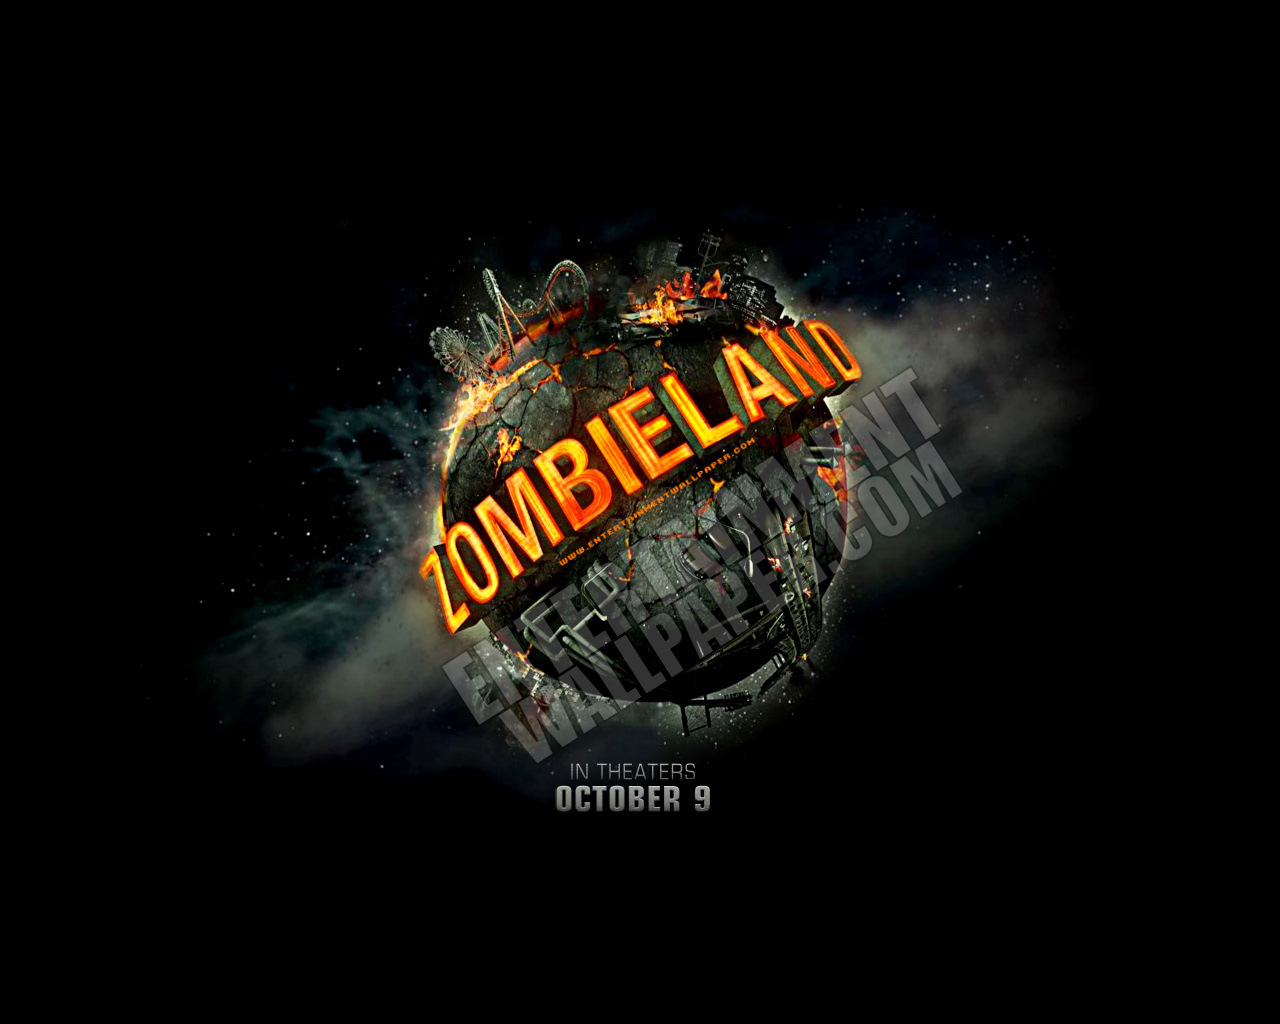 This Cool Collection Of Zombieland Desktop Wallpaper Perfect